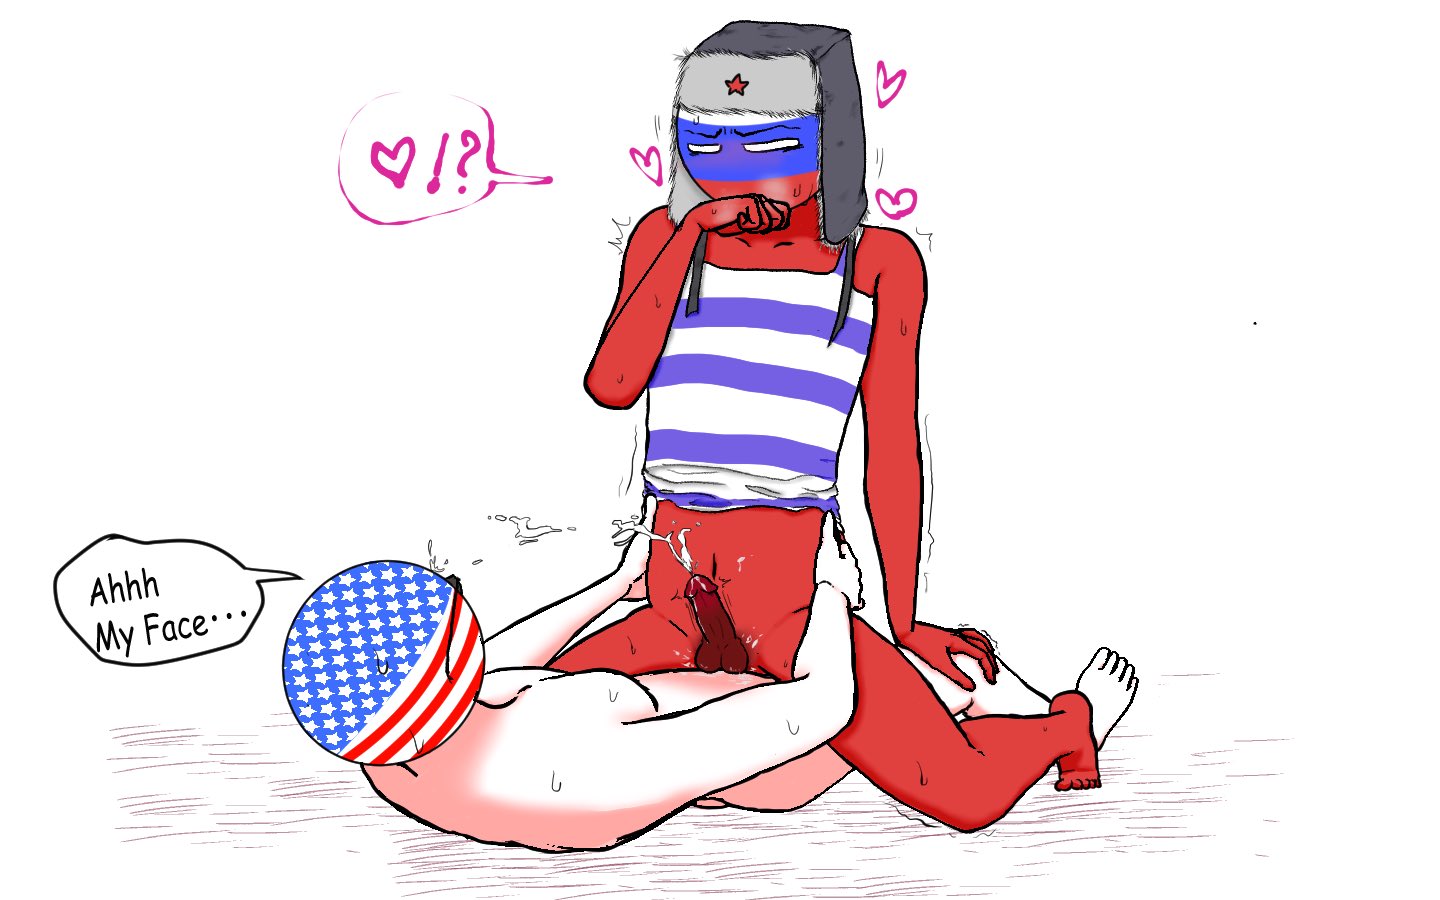 russia (countryhumans), united states of america (countryhumans), countryhu...